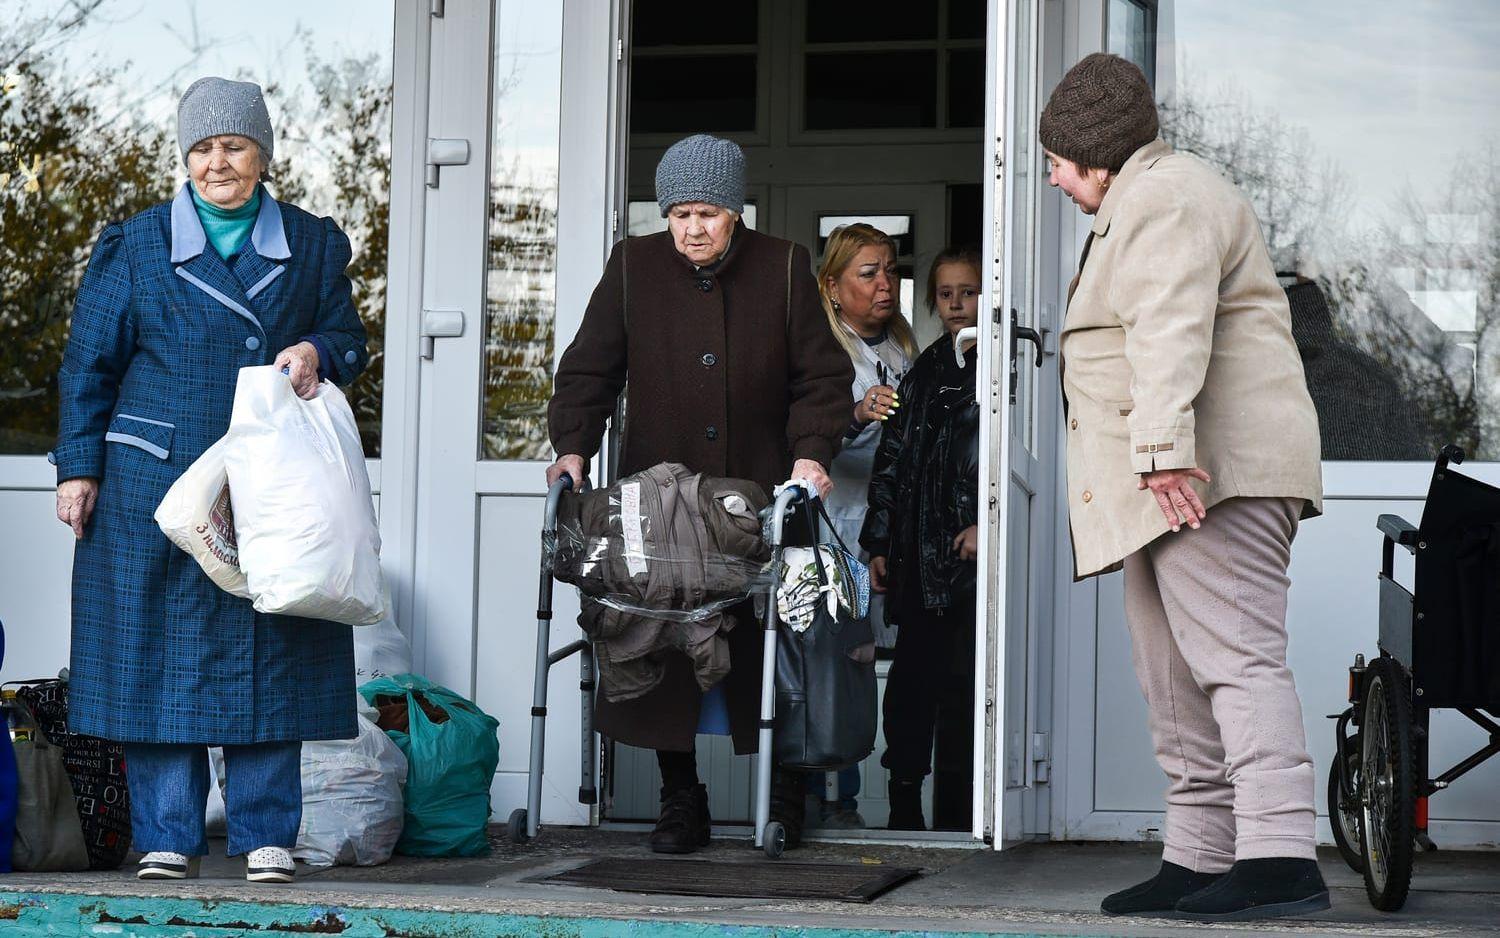 Elderly evacuees from Kherson leave their geriatric boarding house to move to the Crimea, southern Ukraine, Saturday, Nov. 5, 2022. Russian authorities have encouraged residents of Kherson to evacuate, warning that the city may come under massive Ukrainian shelling. (AP Photo)  XAZ116